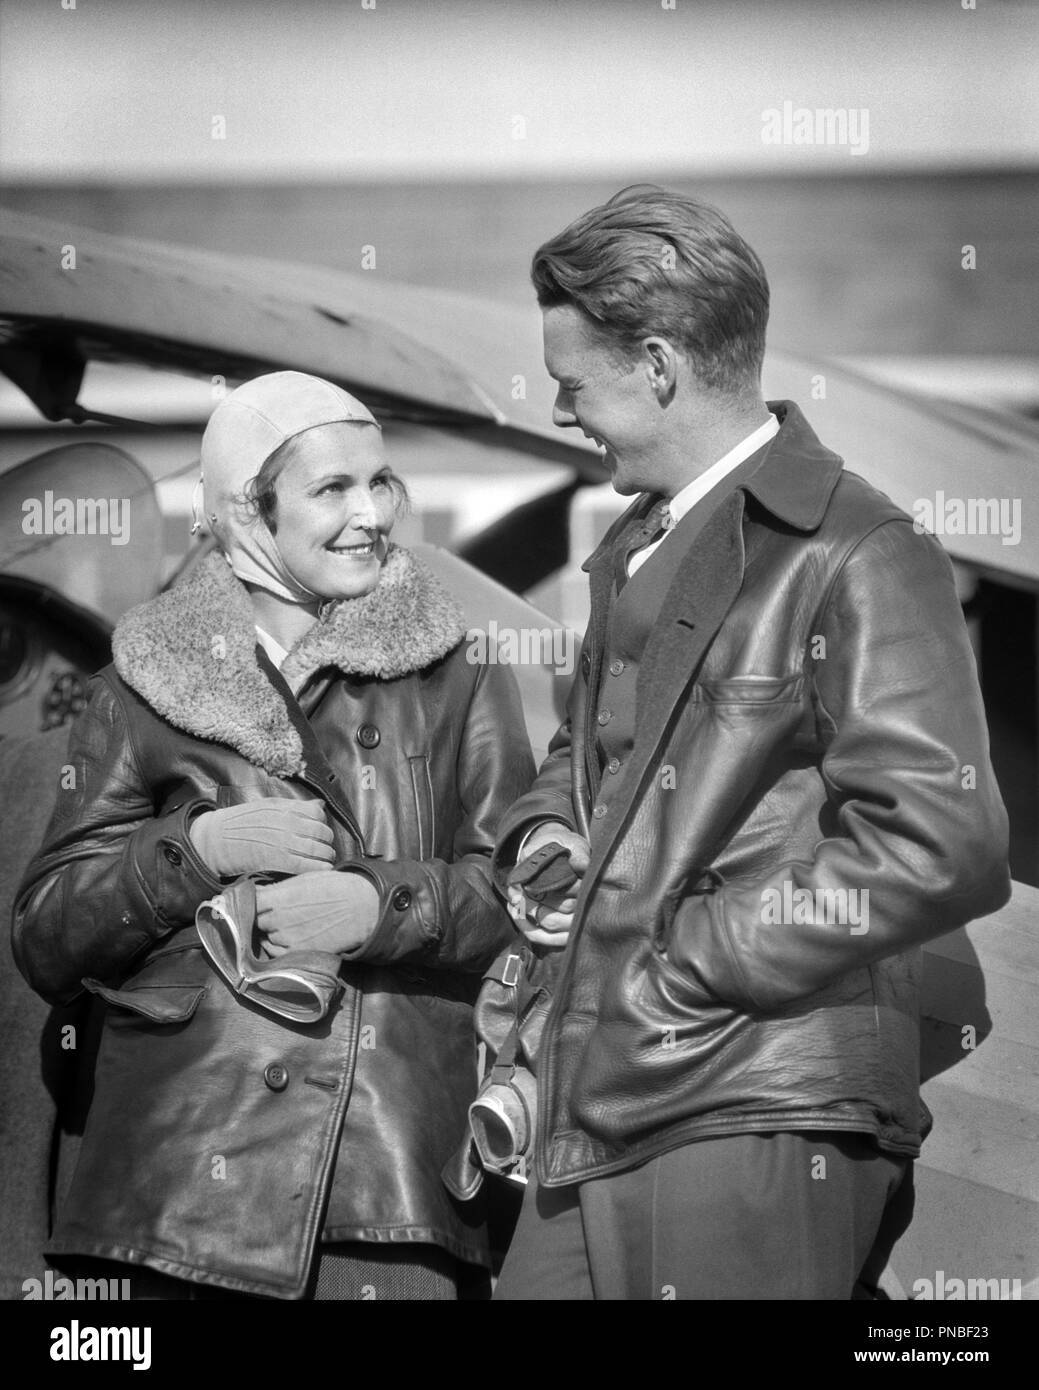 1930s COUPLE WEARING LEATHER JACKETS HOLDING GOGGLES LOOKING AT TALKING TO EACHOTHER STANDING BY AIRPLANE  - a4378 HAR001 HARS 1 AIRCRAFT FACIAL STYLE TEAMWORK PLEASED JOY LIFESTYLE PLANES FEMALES MARRIED SPOUSE HUSBANDS HEALTHINESS FRIENDSHIP HALF-LENGTH LADIES PERSONS GOGGLES MALES TRANSPORTATION EXPRESSIONS B&W PILOTS HAPPINESS CHEERFUL ADVENTURE AIRPLANES STYLES EXCITEMENT AT BY TO AVIATION OCCUPATIONS SMILES AVIATOR ESCAPE JOYFUL STYLISH AVIATRIX FASHIONS TOGETHERNESS WIVES BLACK AND WHITE CAUCASIAN ETHNICITY COPILOT EACH OTHER HAR001 JACKETS OLD FASHIONED Stock Photo